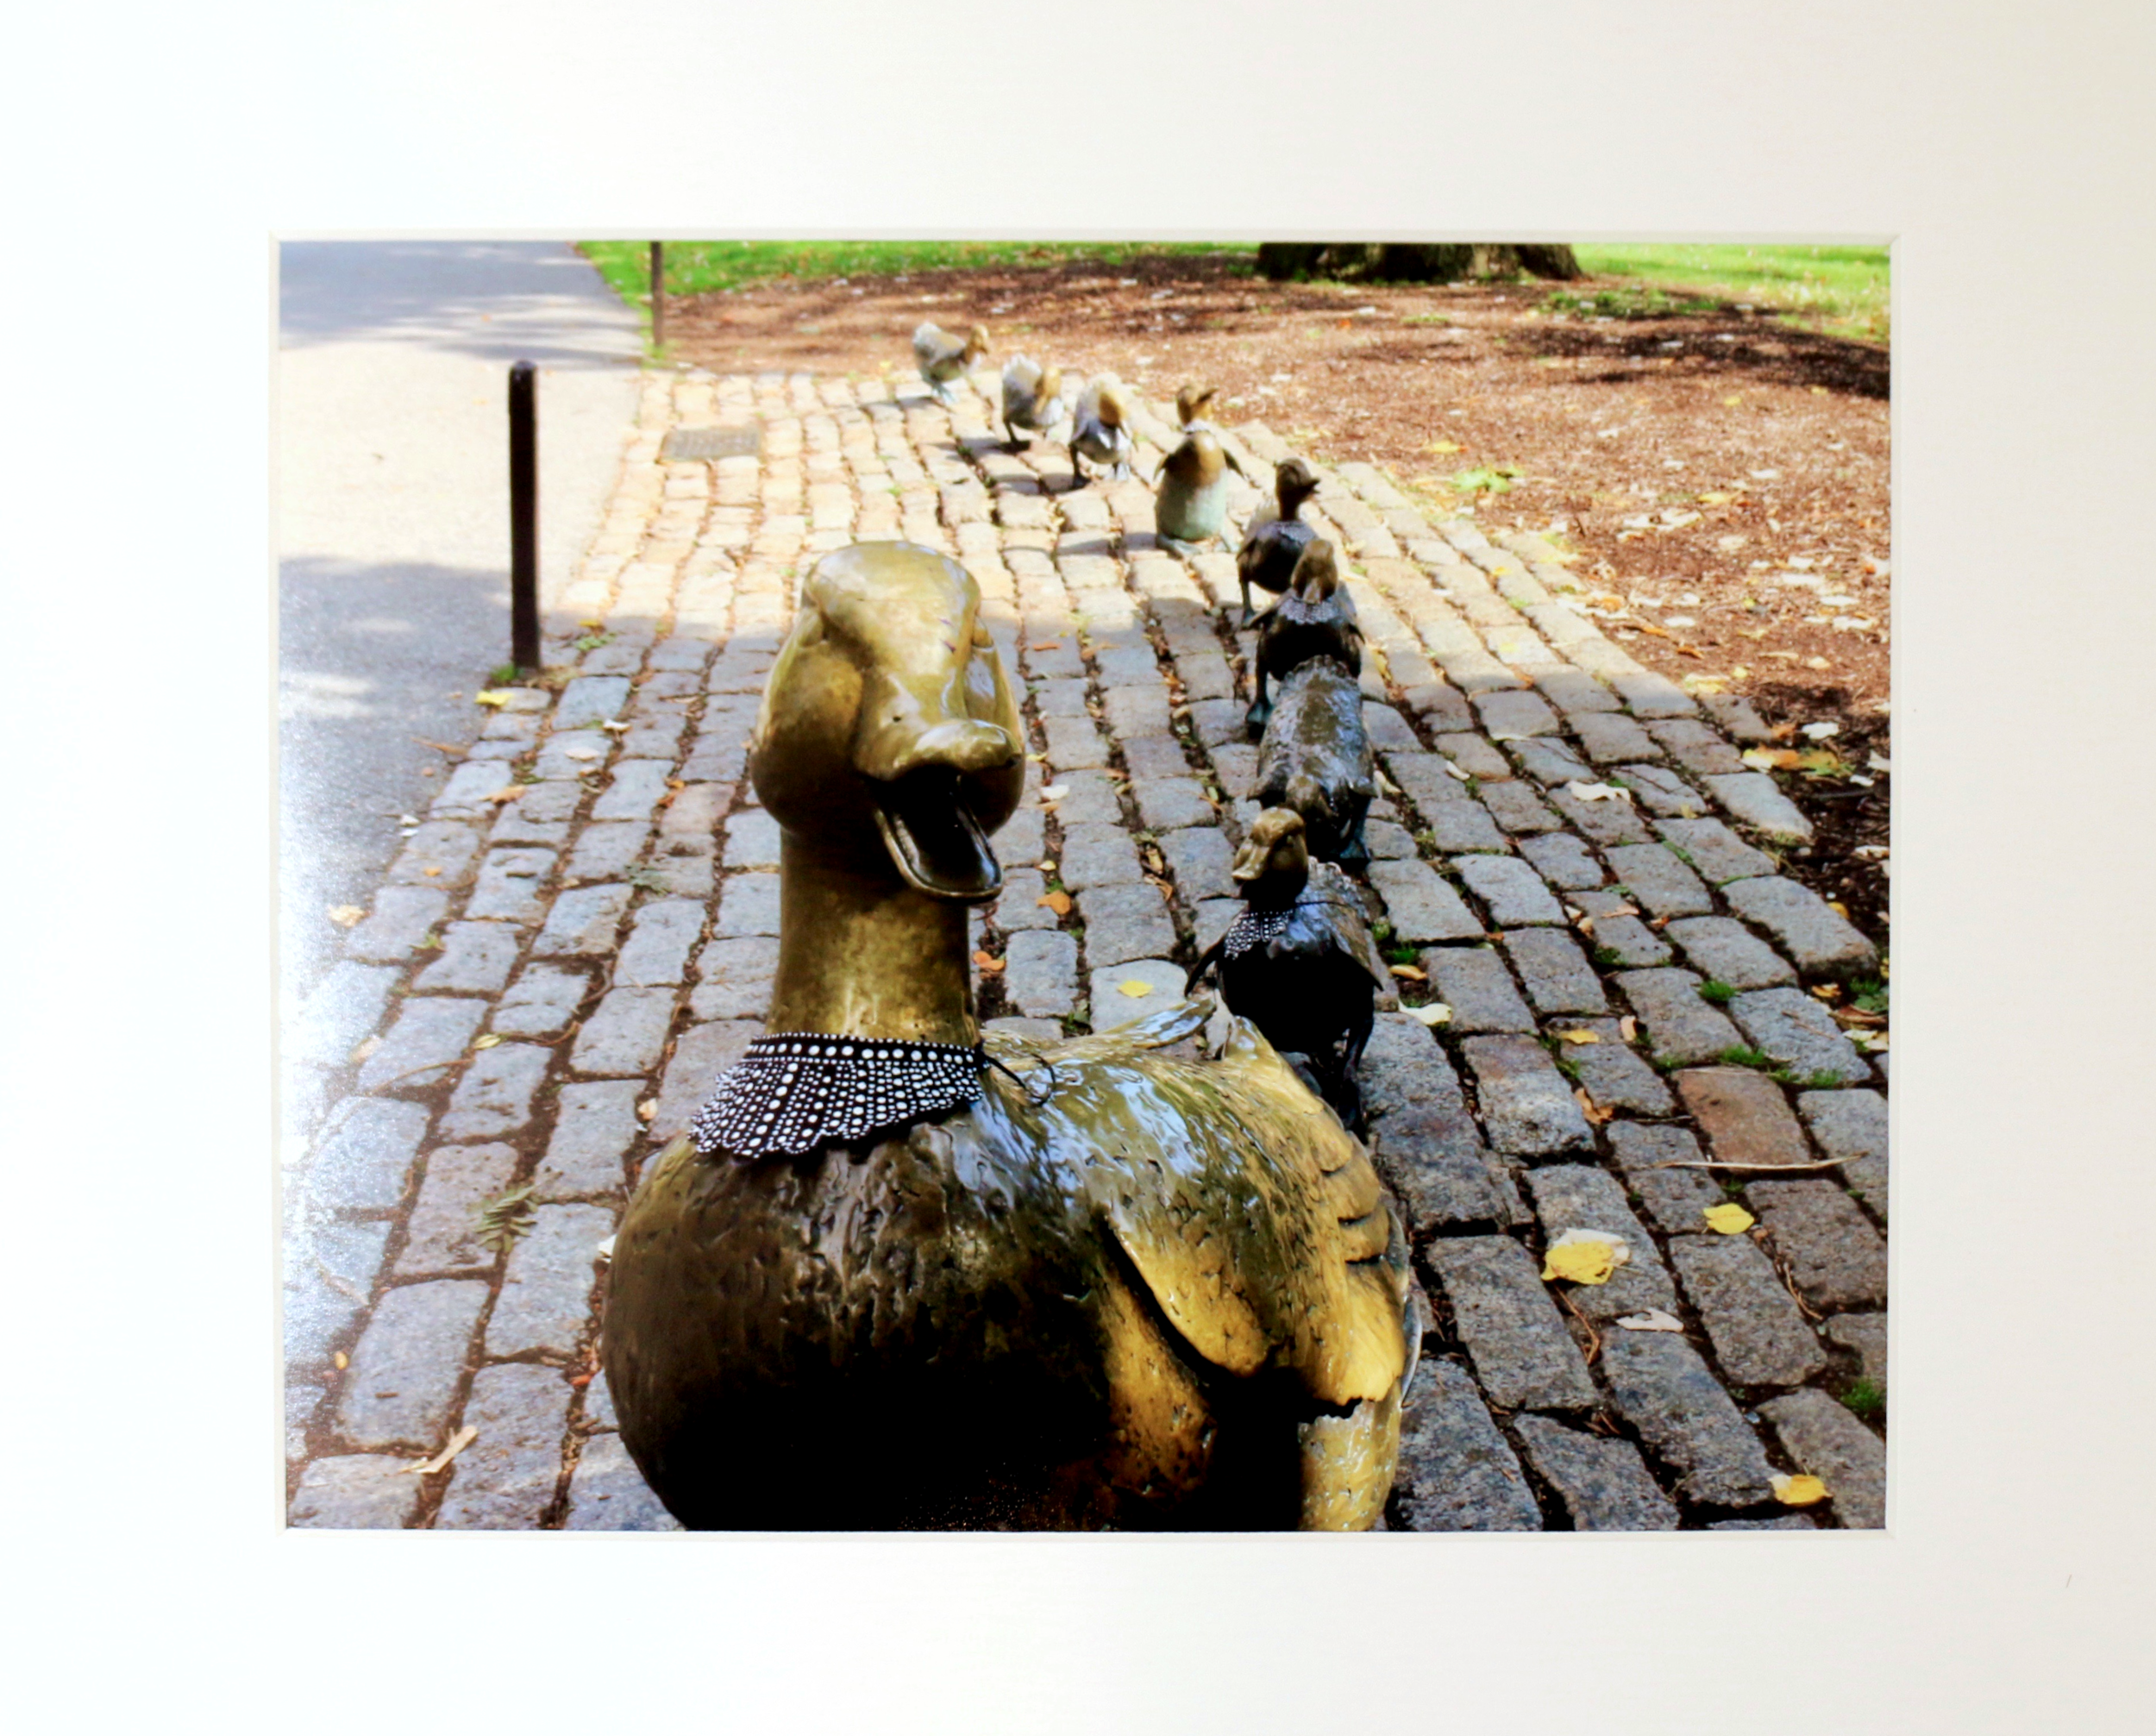  Dissent Ducklings  Giclee print 